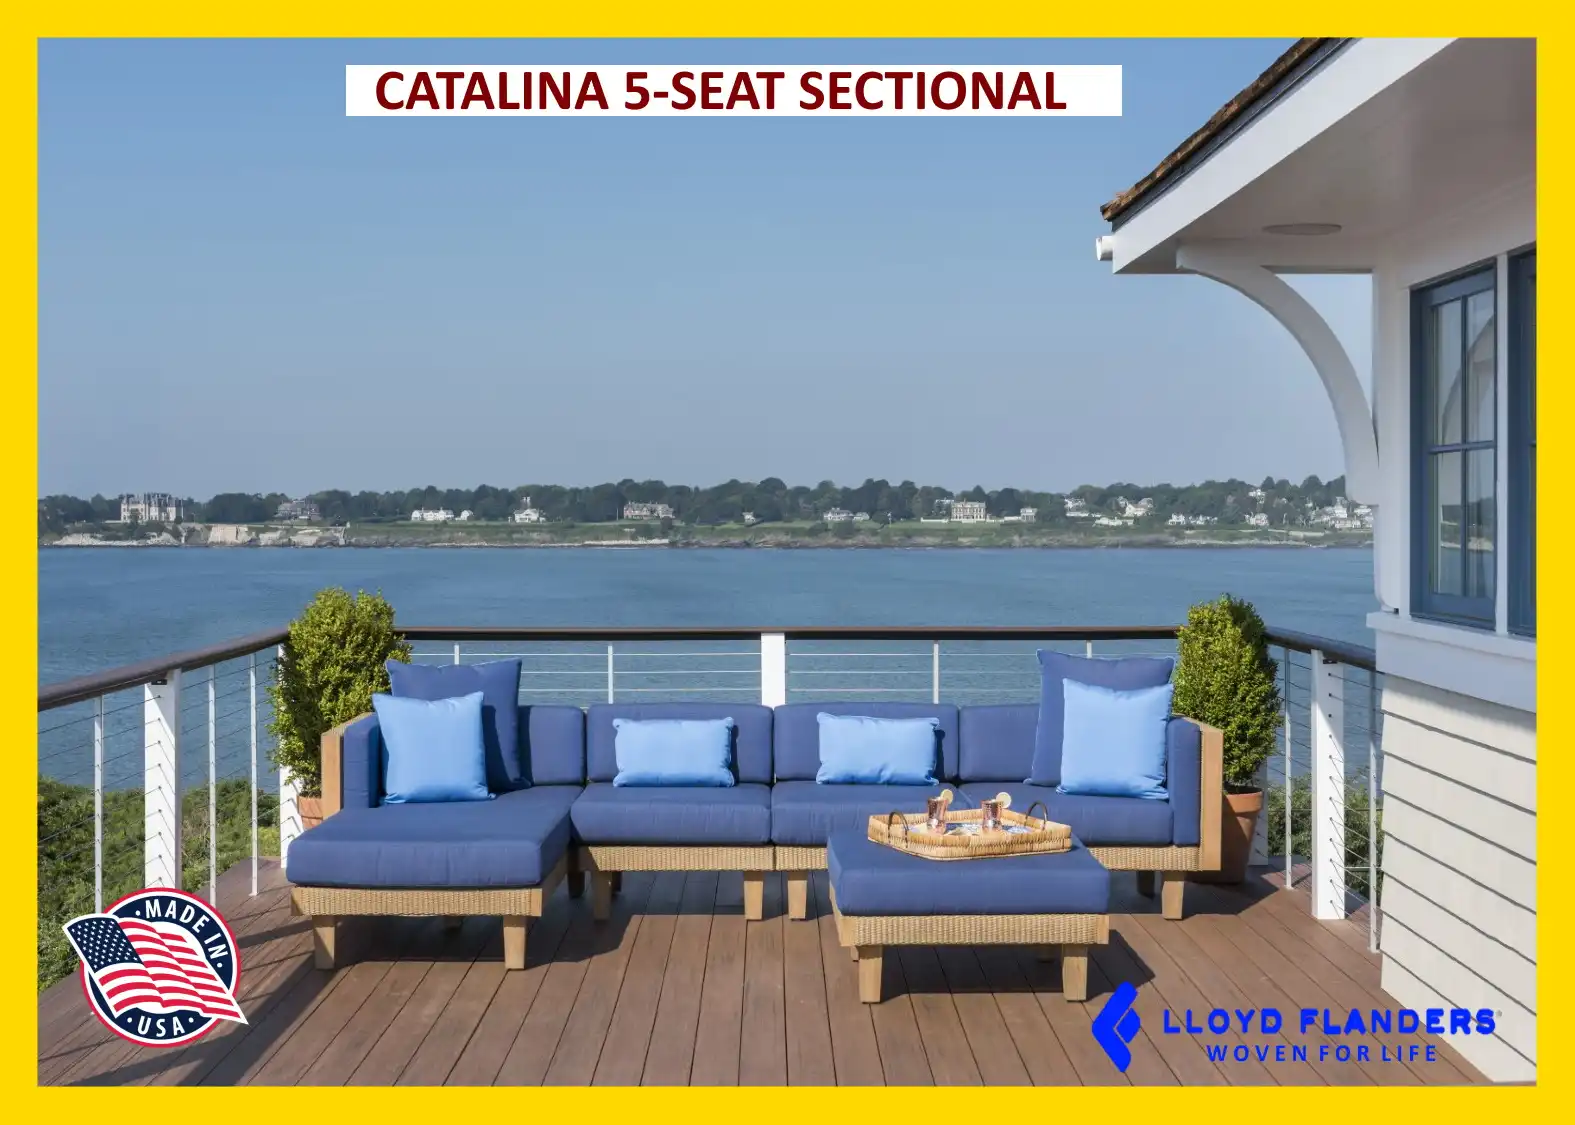 CATALINA 5-SEAT SECTIONAL